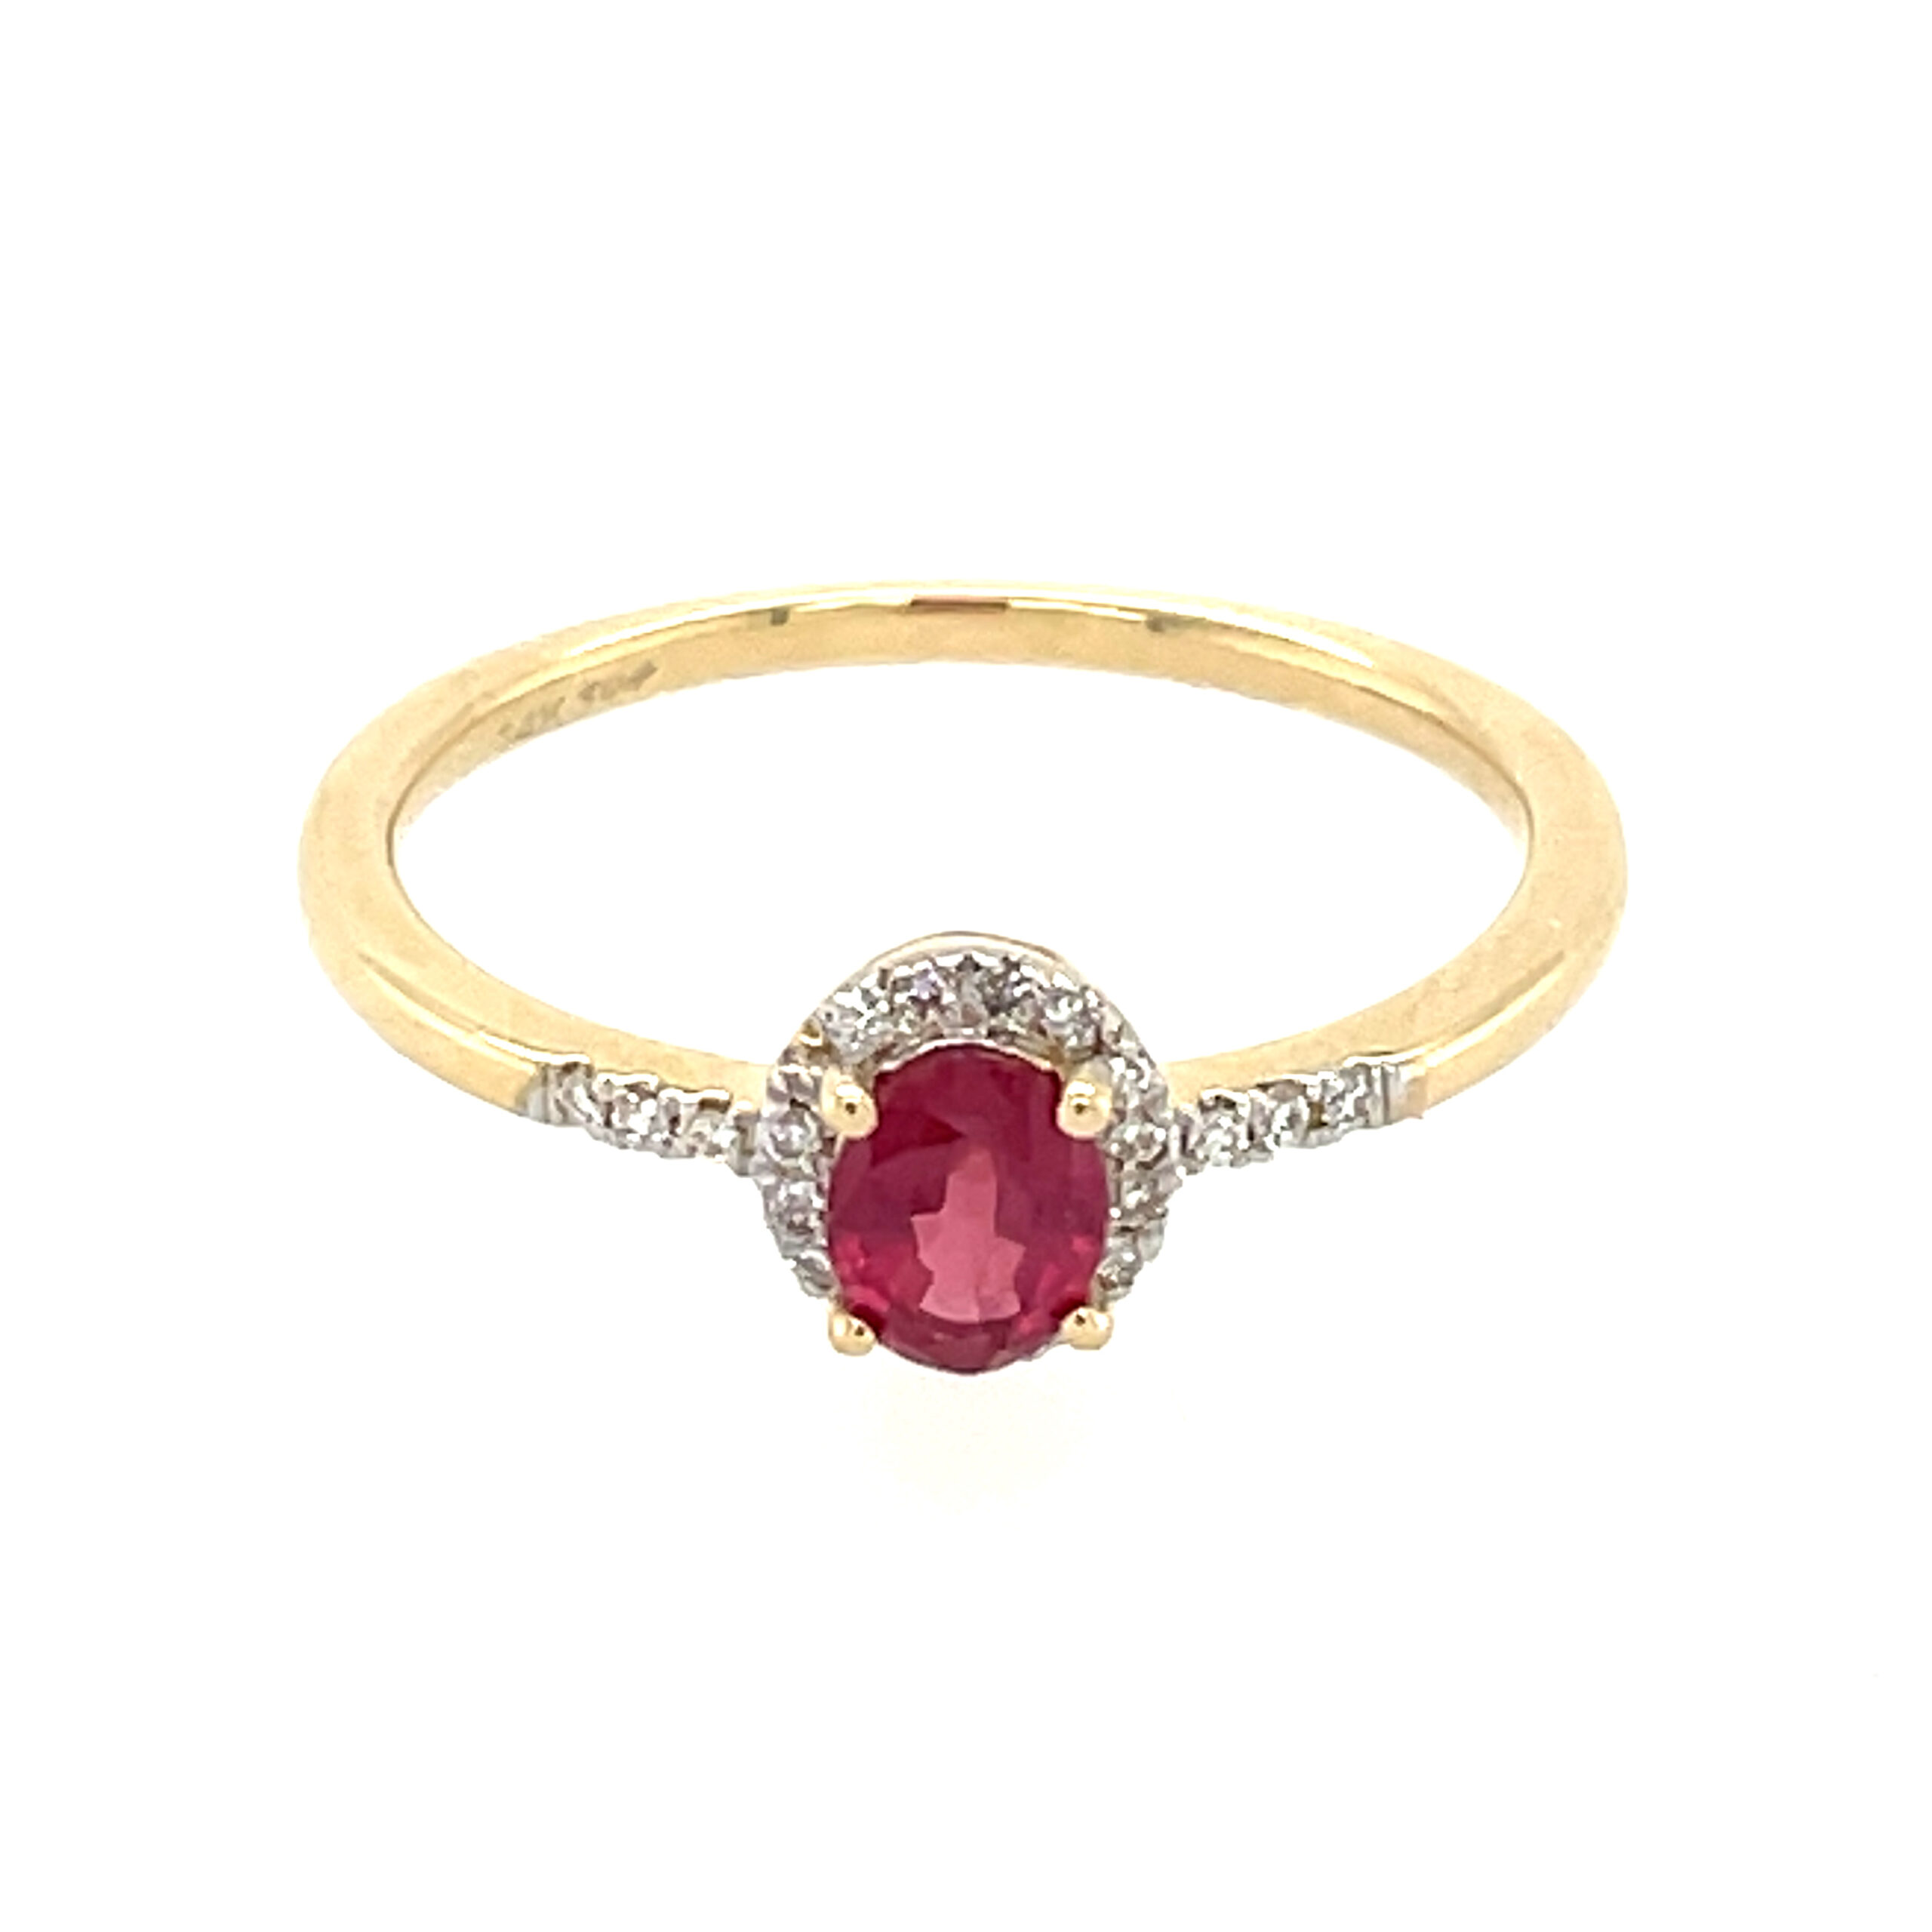 Yellow Gold Ruby Ring with Diamonds